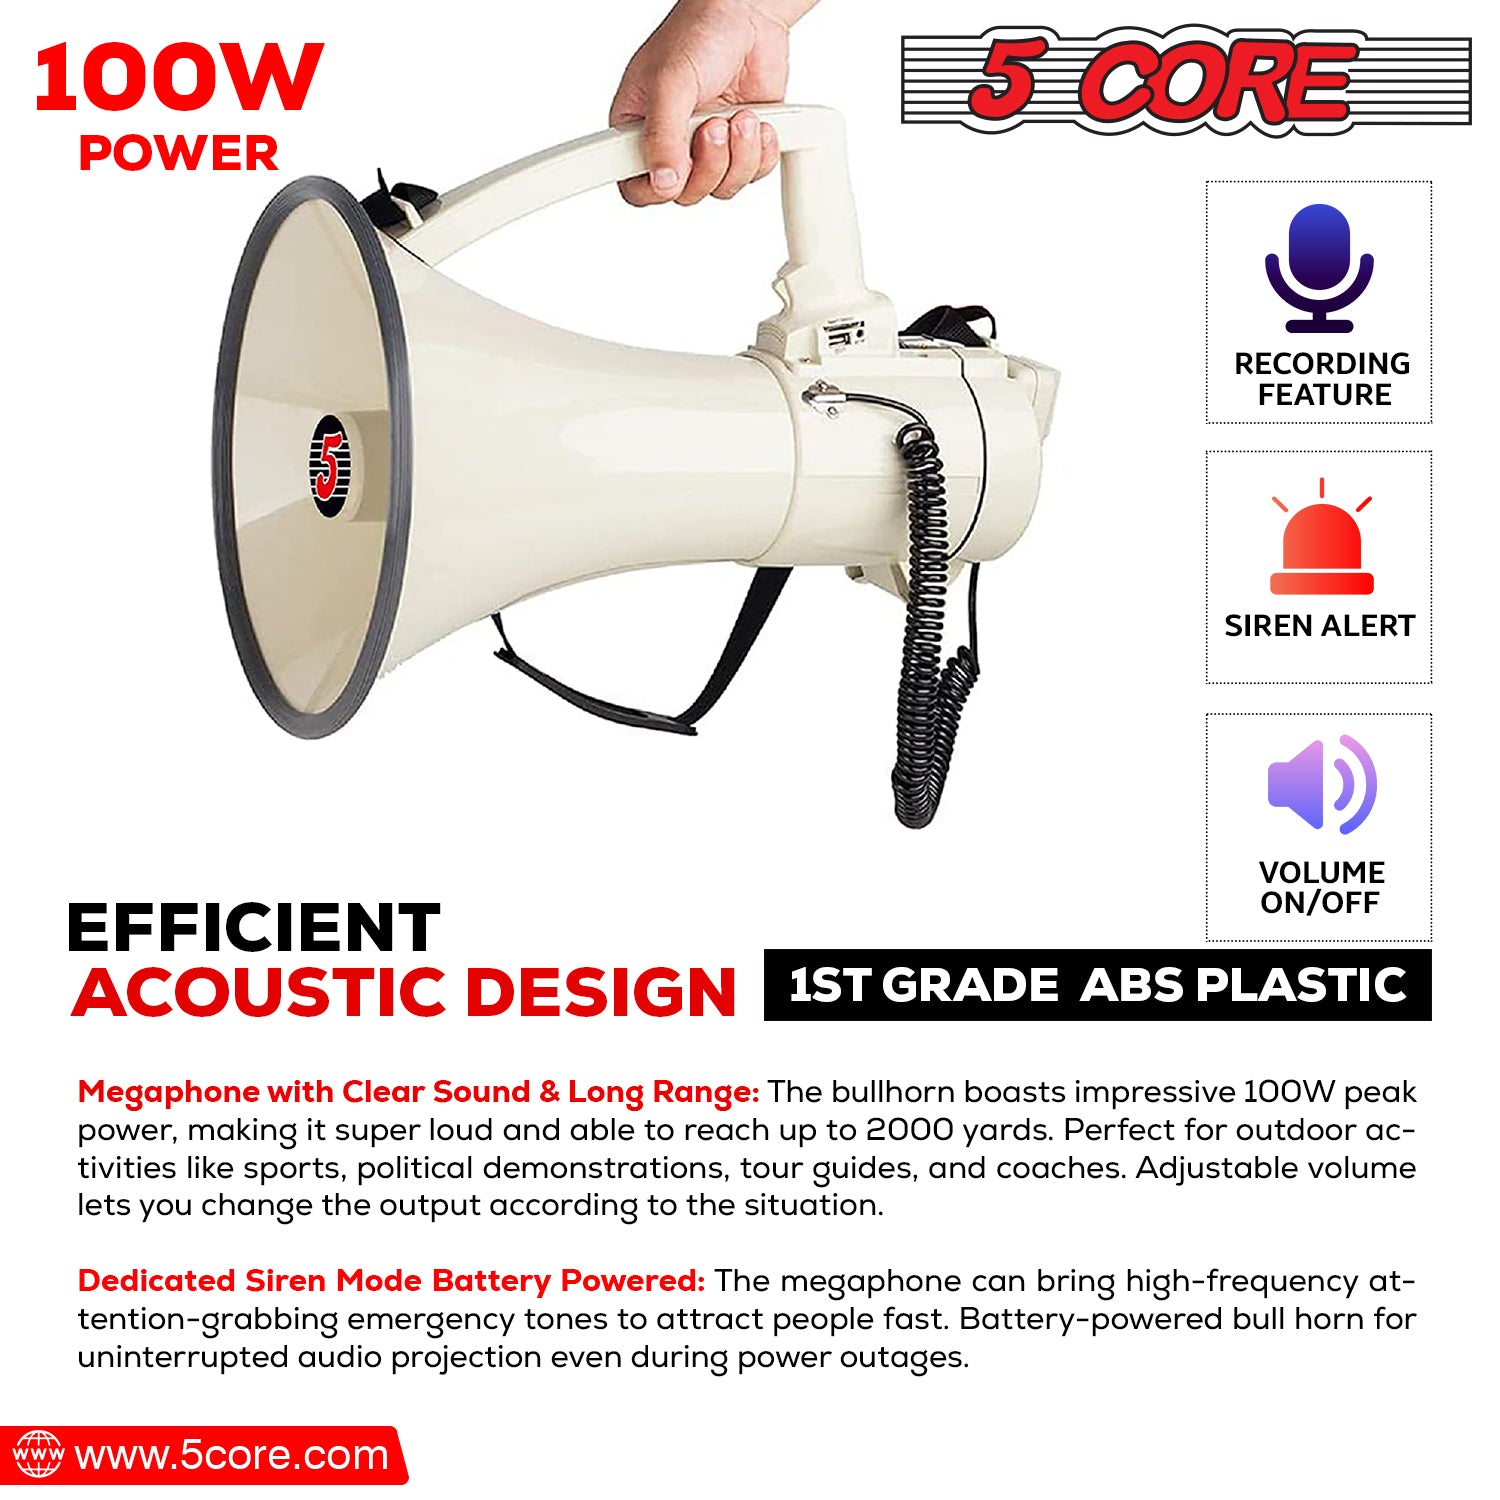 Enhanced Voice Projection - 5 Core Bull Horn Megaphone Delivers Crisp and Clear Audio